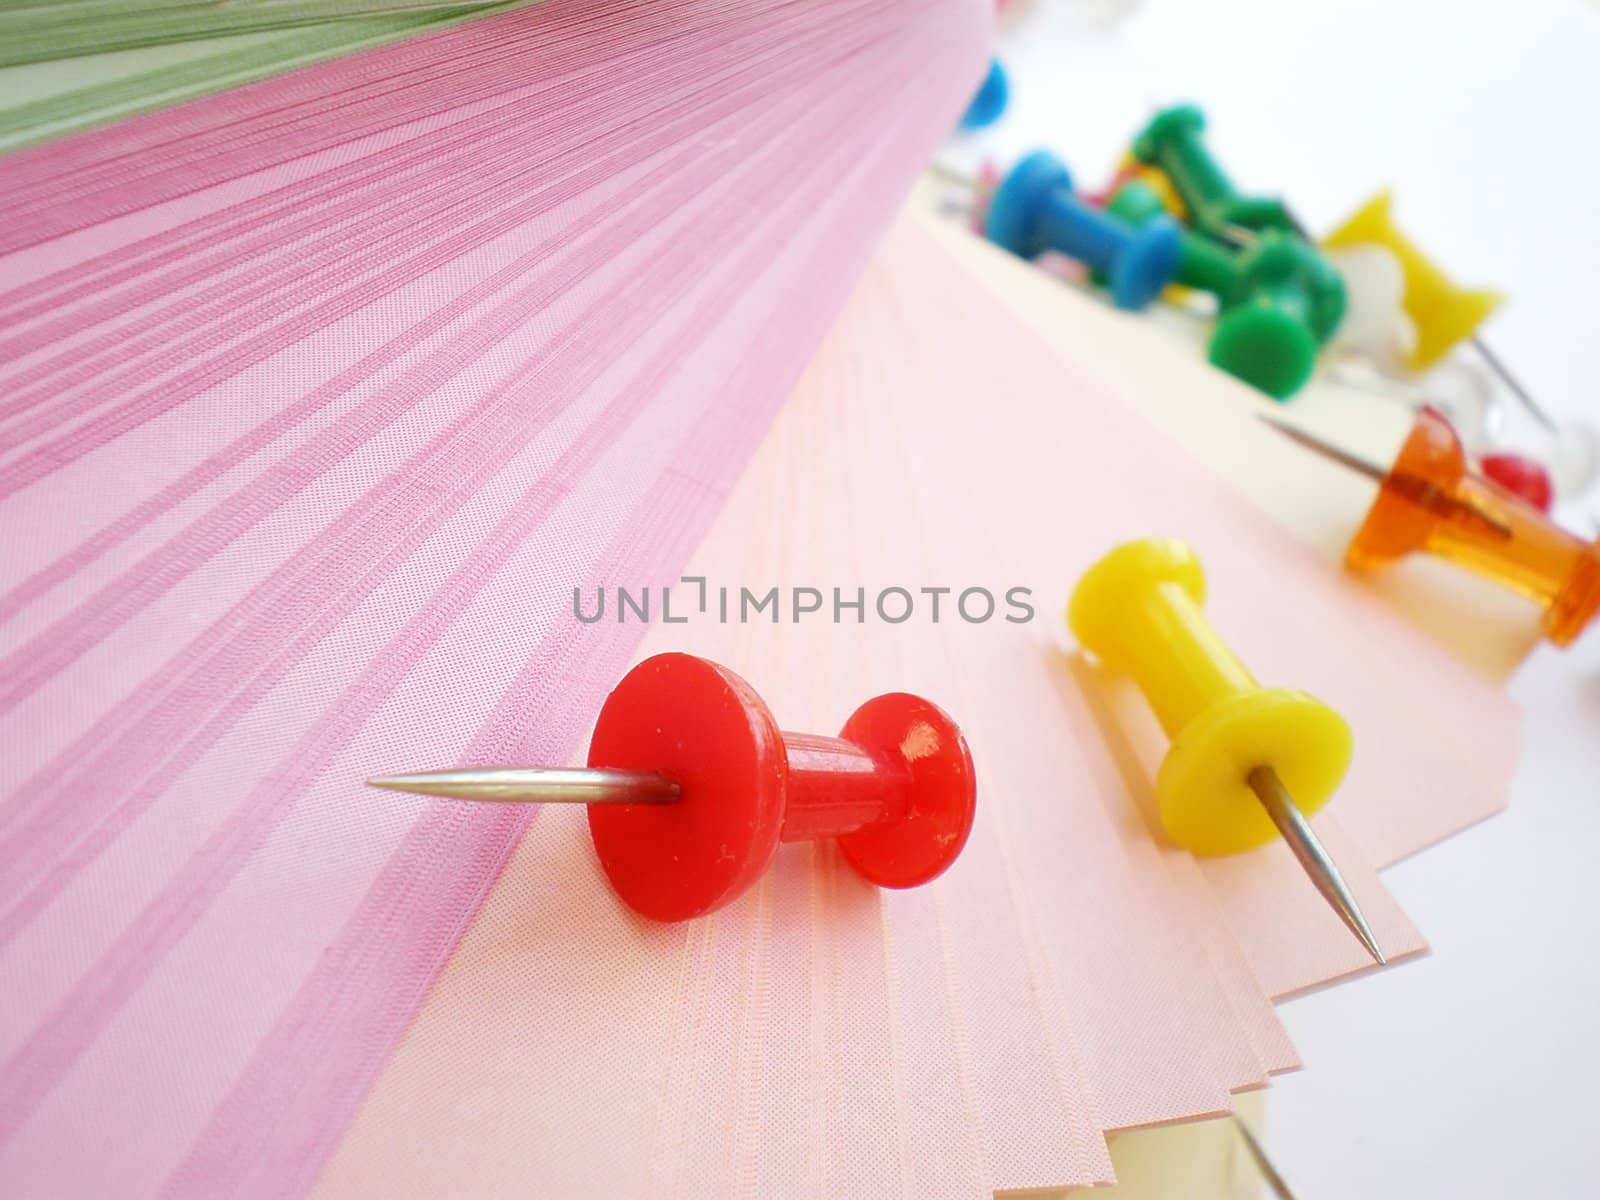 colorful sheets and push pins on white background